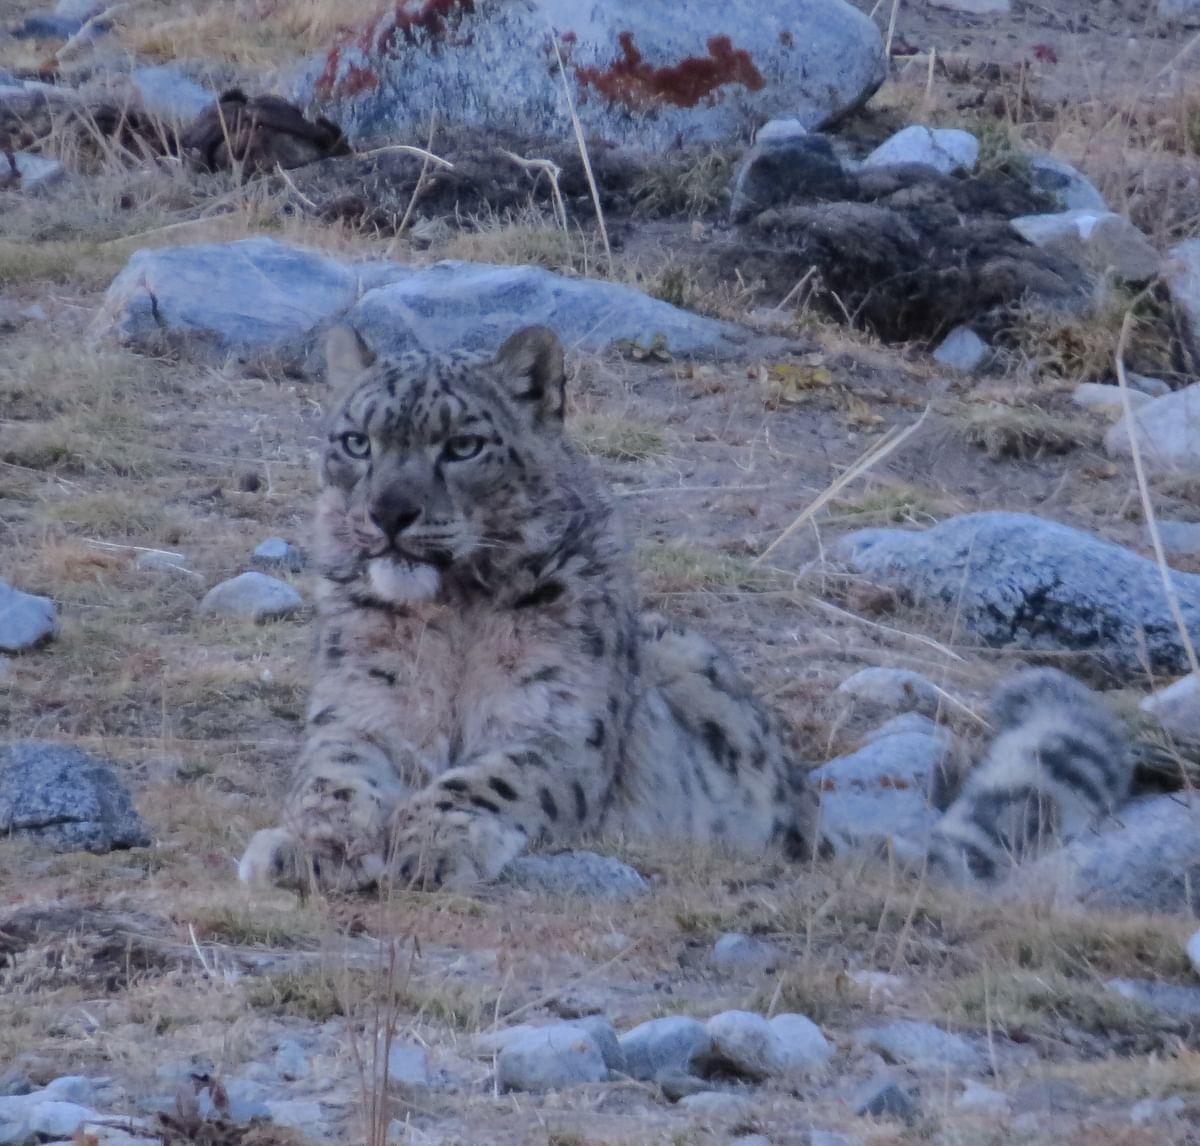 We spotted the snow leopard.